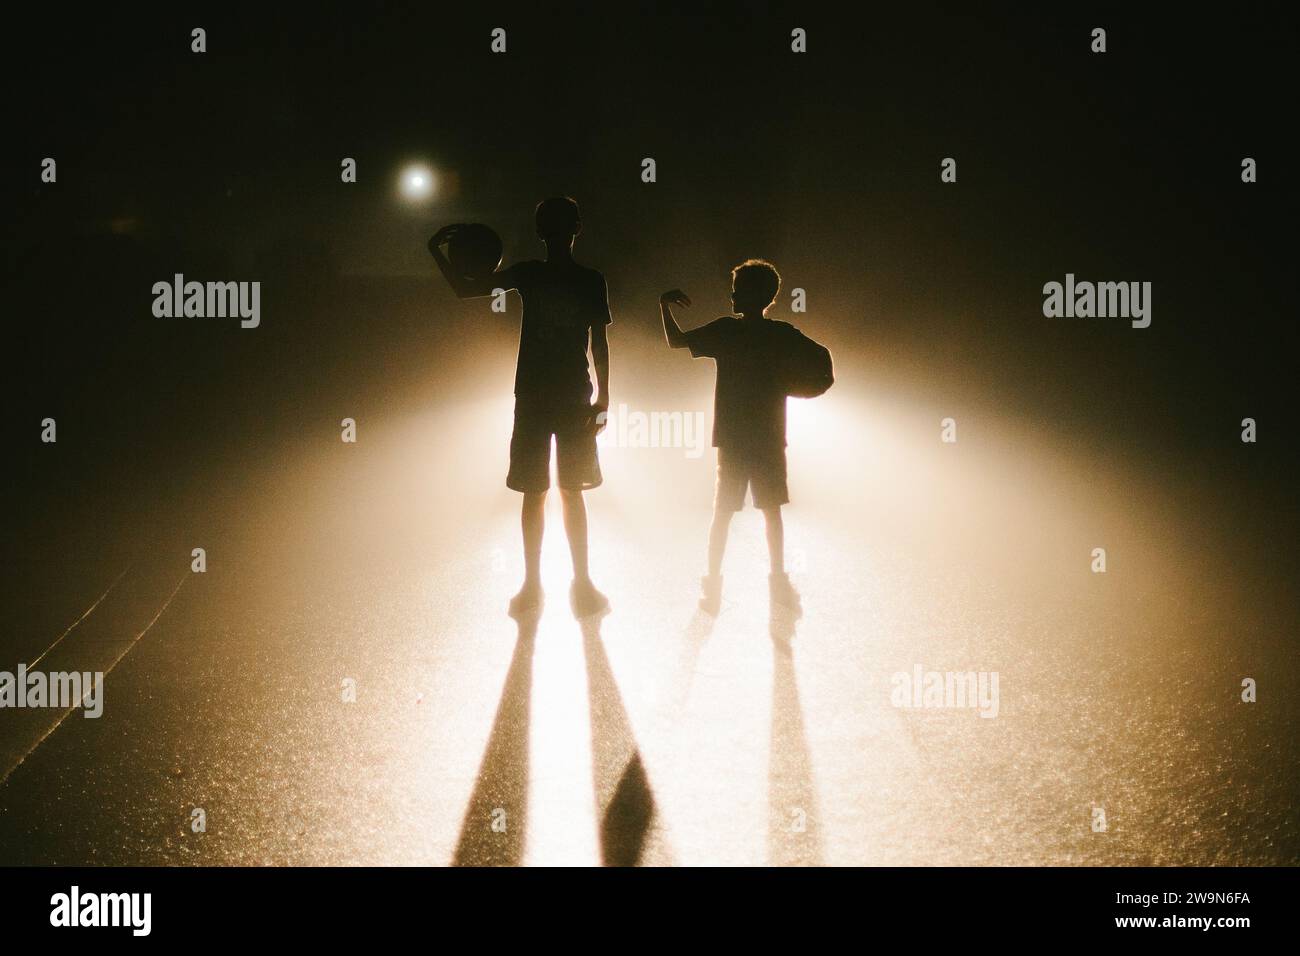 Brothers backlit at night with basketballs on the road Stock Photo